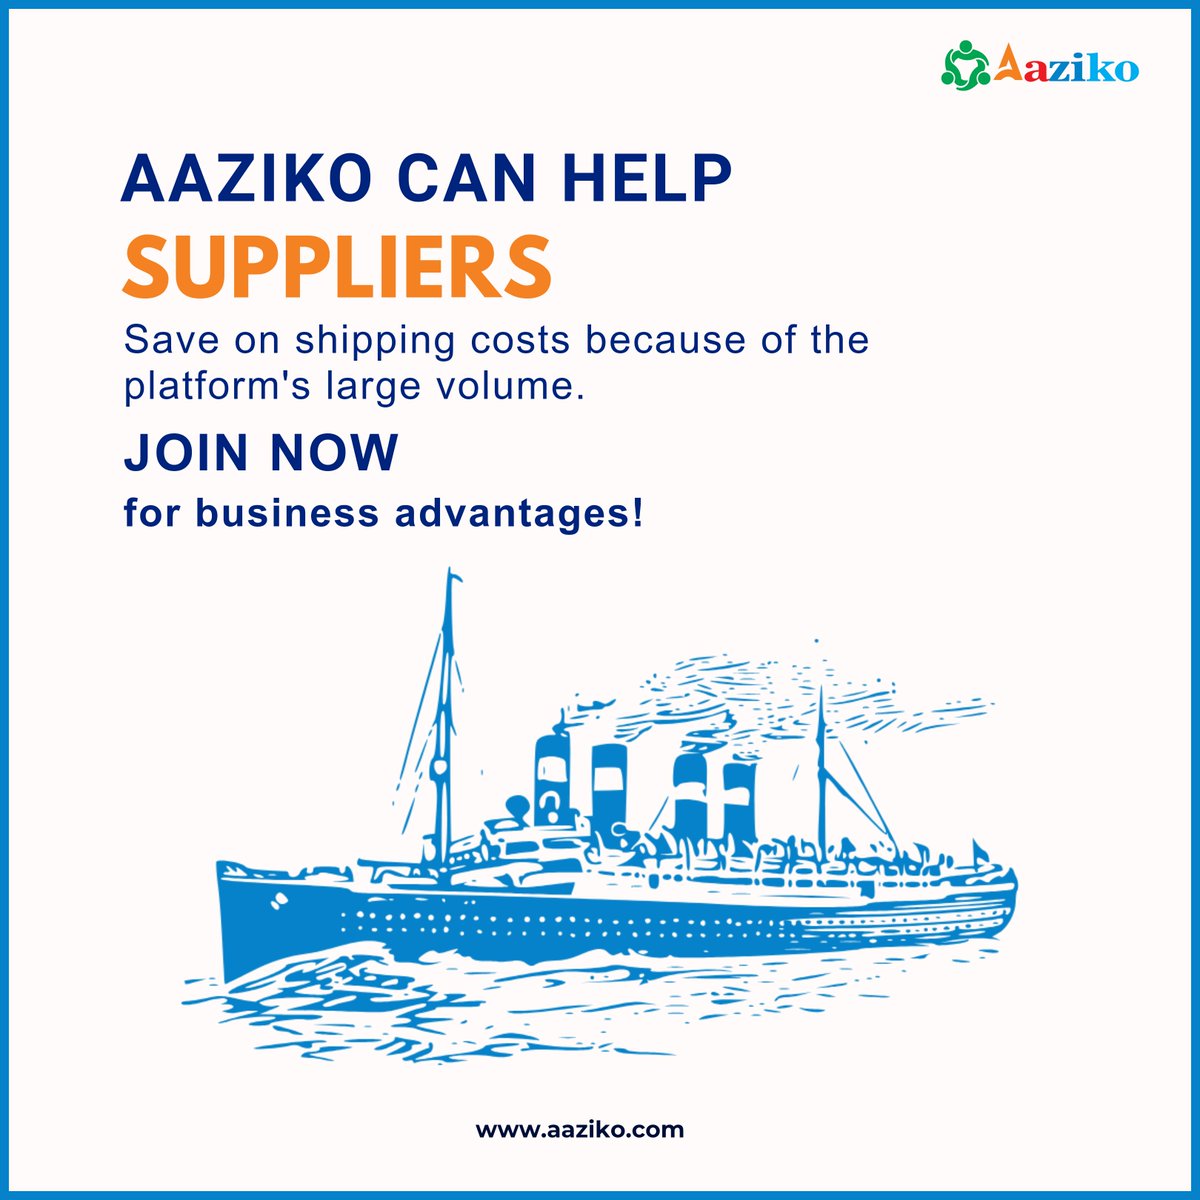 Join our platform now to tap into the advantages of our large volume, providing suppliers with unparalleled business benefits. Don't miss out on the opportunity to optimize your logistics and boost your bottom line. Join AAZIKO today!
#AAZIKO #ShippingSavings #BusinessAdvantages